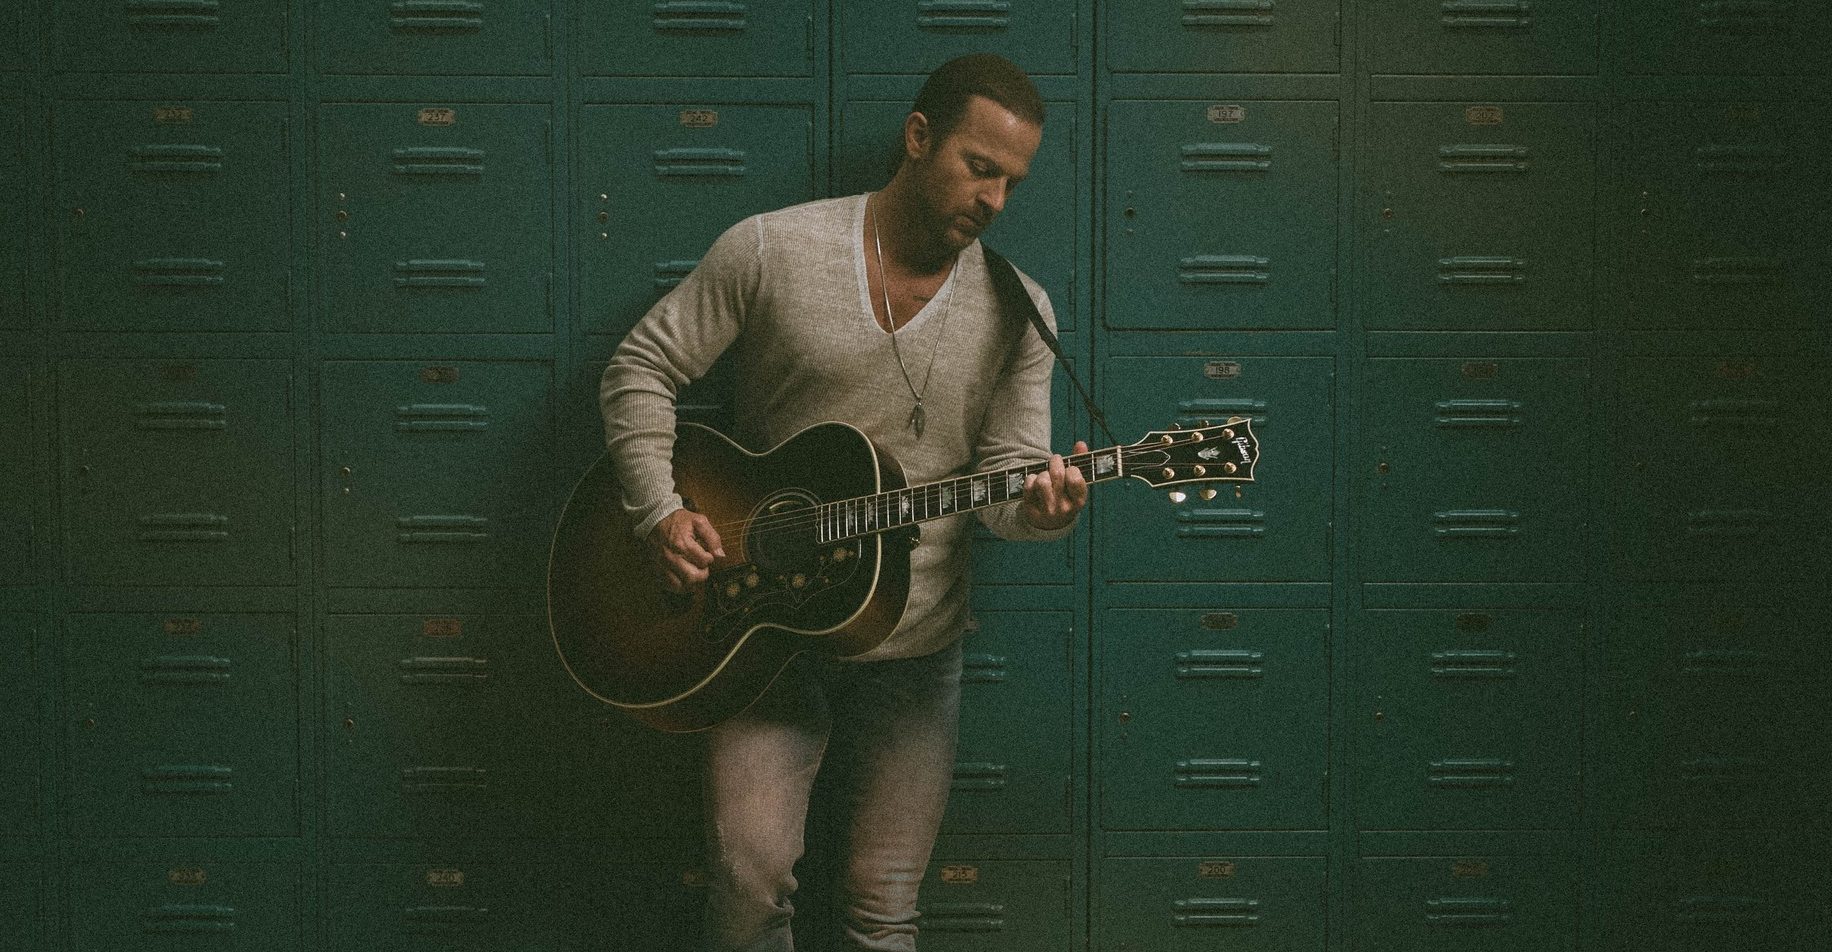 HOT TRACKS: “Fire on Wheels” and “If I Was Your Lover” by Kip Moore